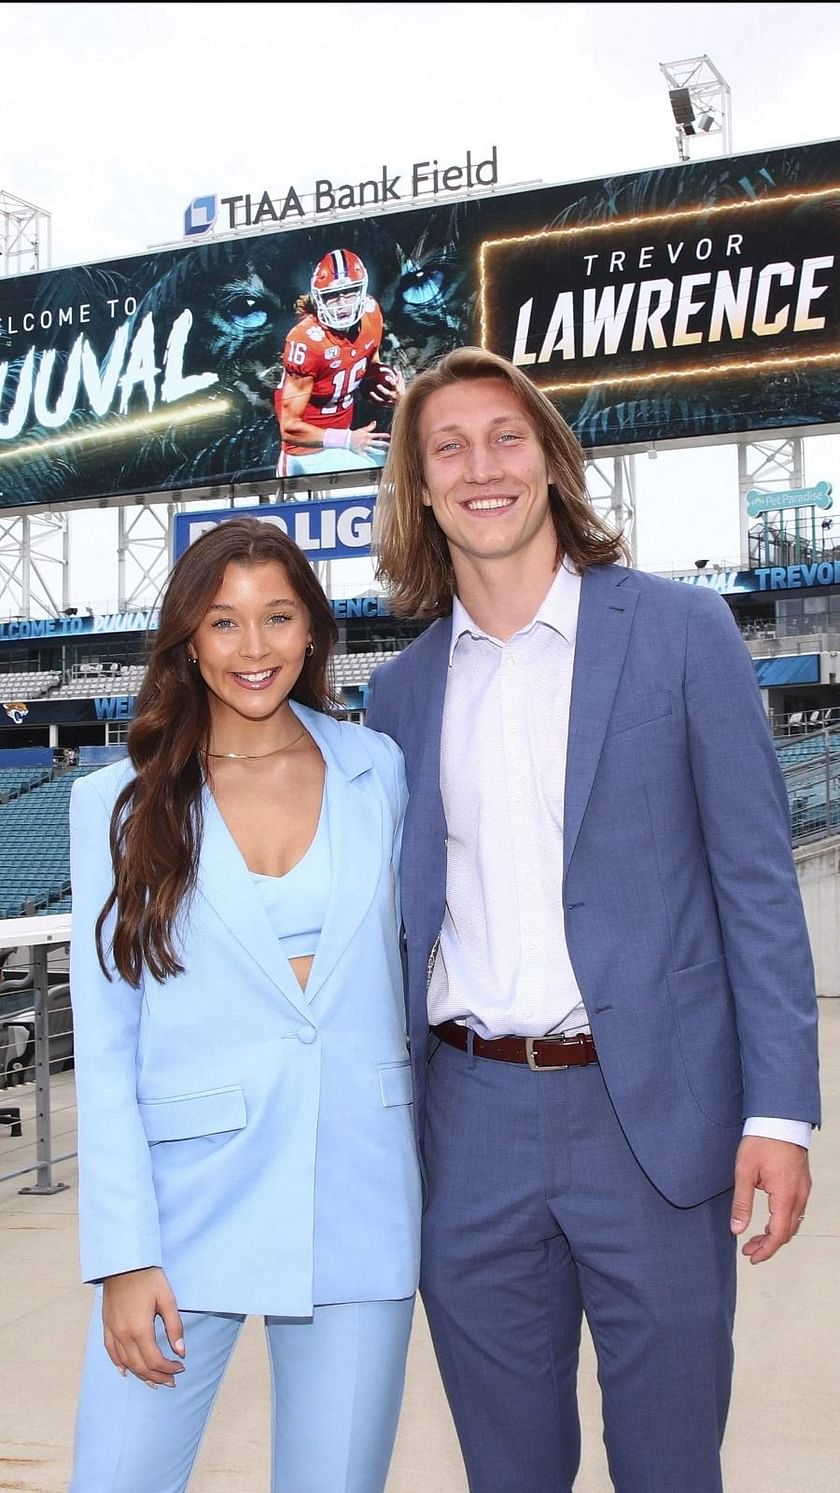 Who is Trevor Lawrence's wife Marissa Mowry?